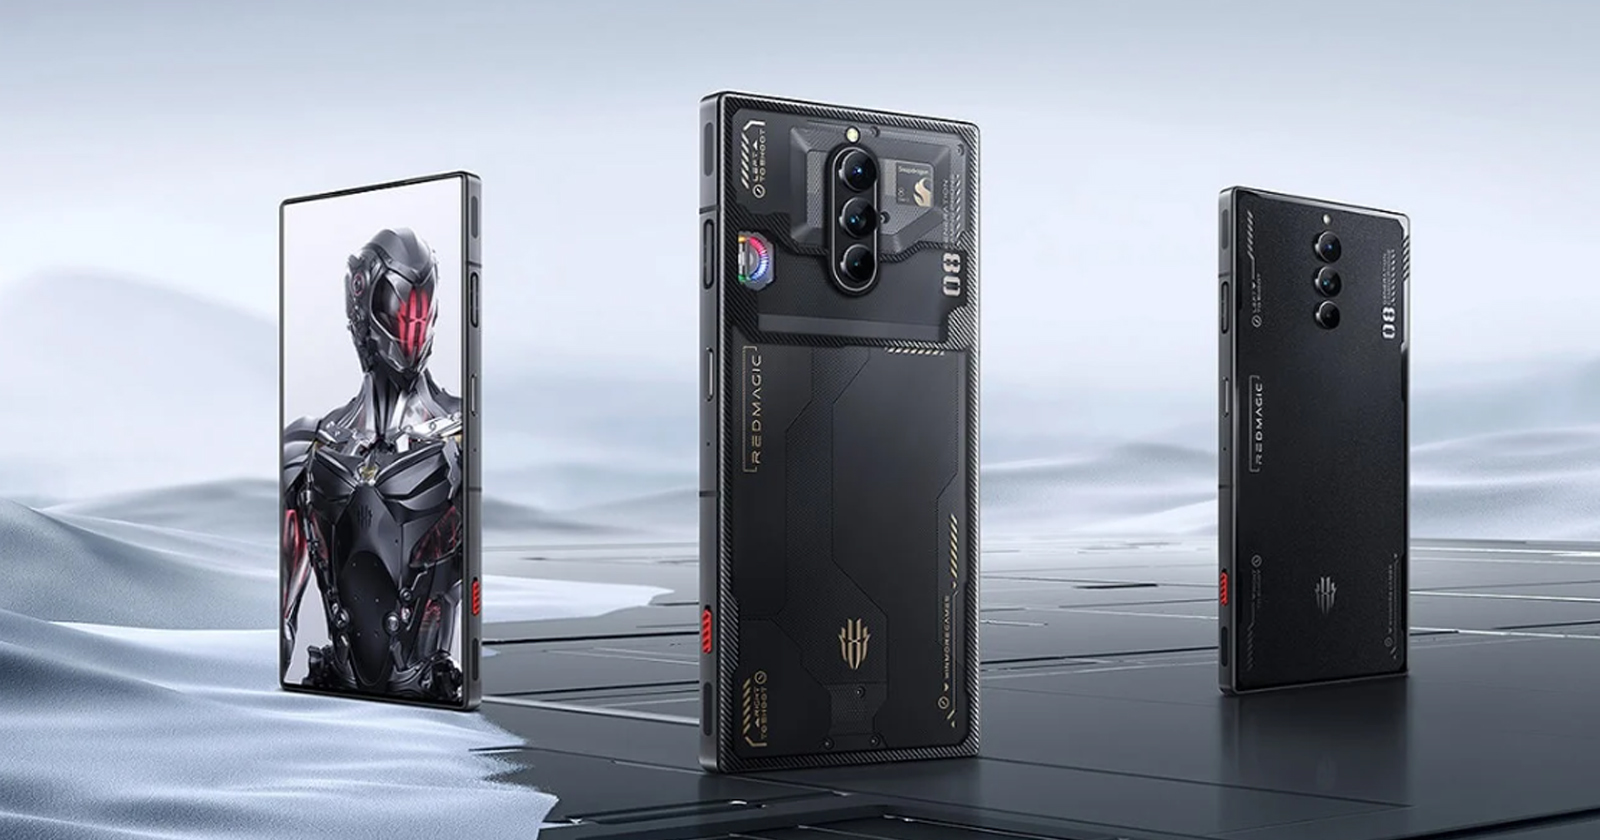 red-magic-9s-pro-and-pro-plus-the-fastest-phone-on-the-market-have-been-introduced